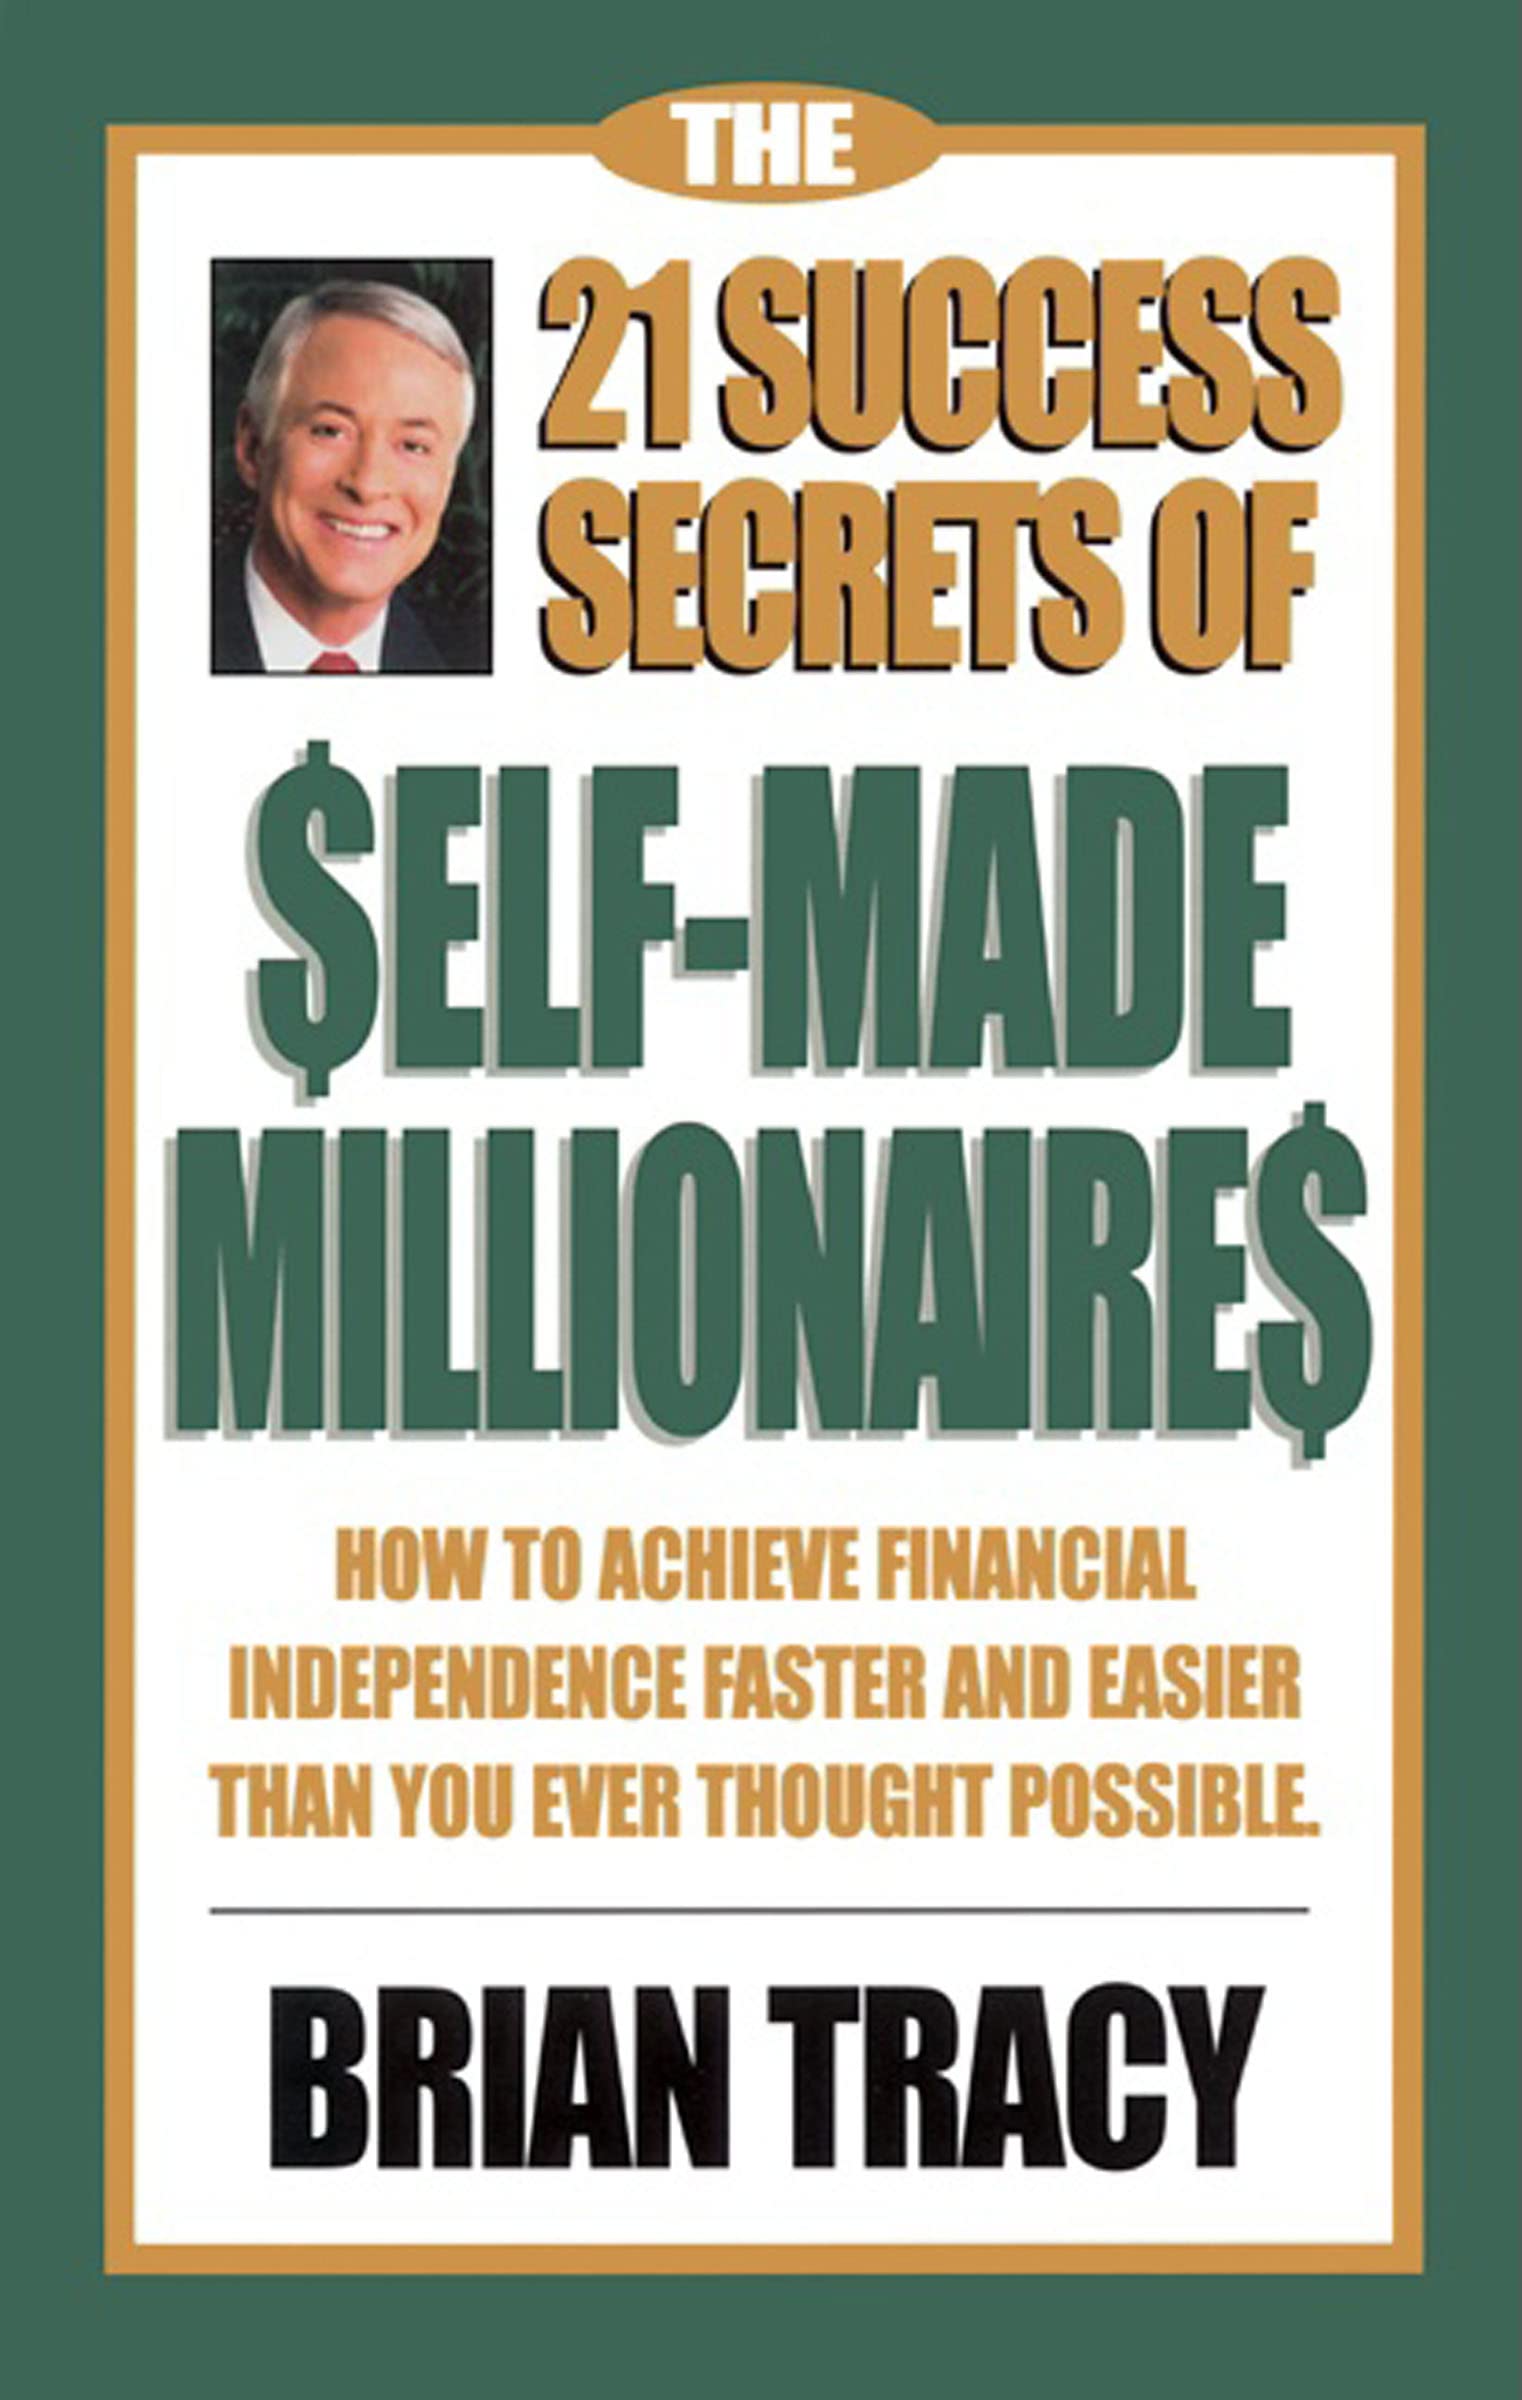 The 21 Success Secrets of Self-Made Millionaires: How to Achieve Financial Independence Faster and Easier Than You Ever Thought Possible (The Laws of Success Series)